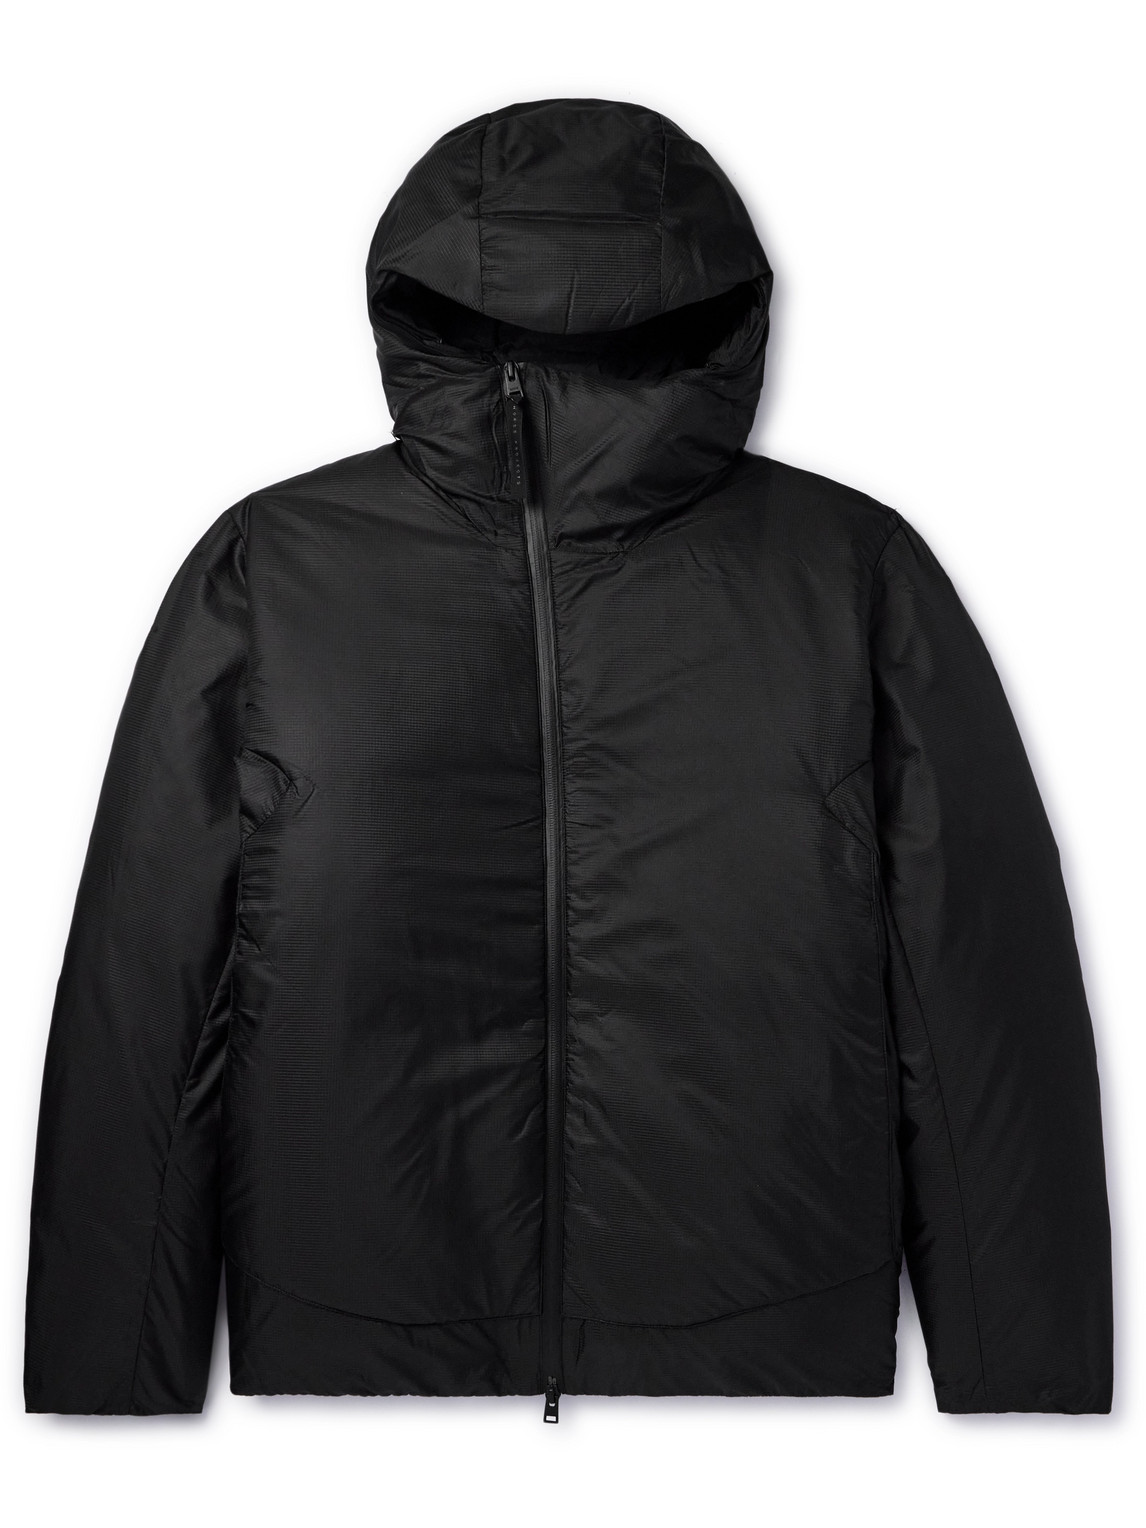 Norse Projects - Pasmo Ripstop Hooded Down Jacket - Men - Black - S von Norse Projects